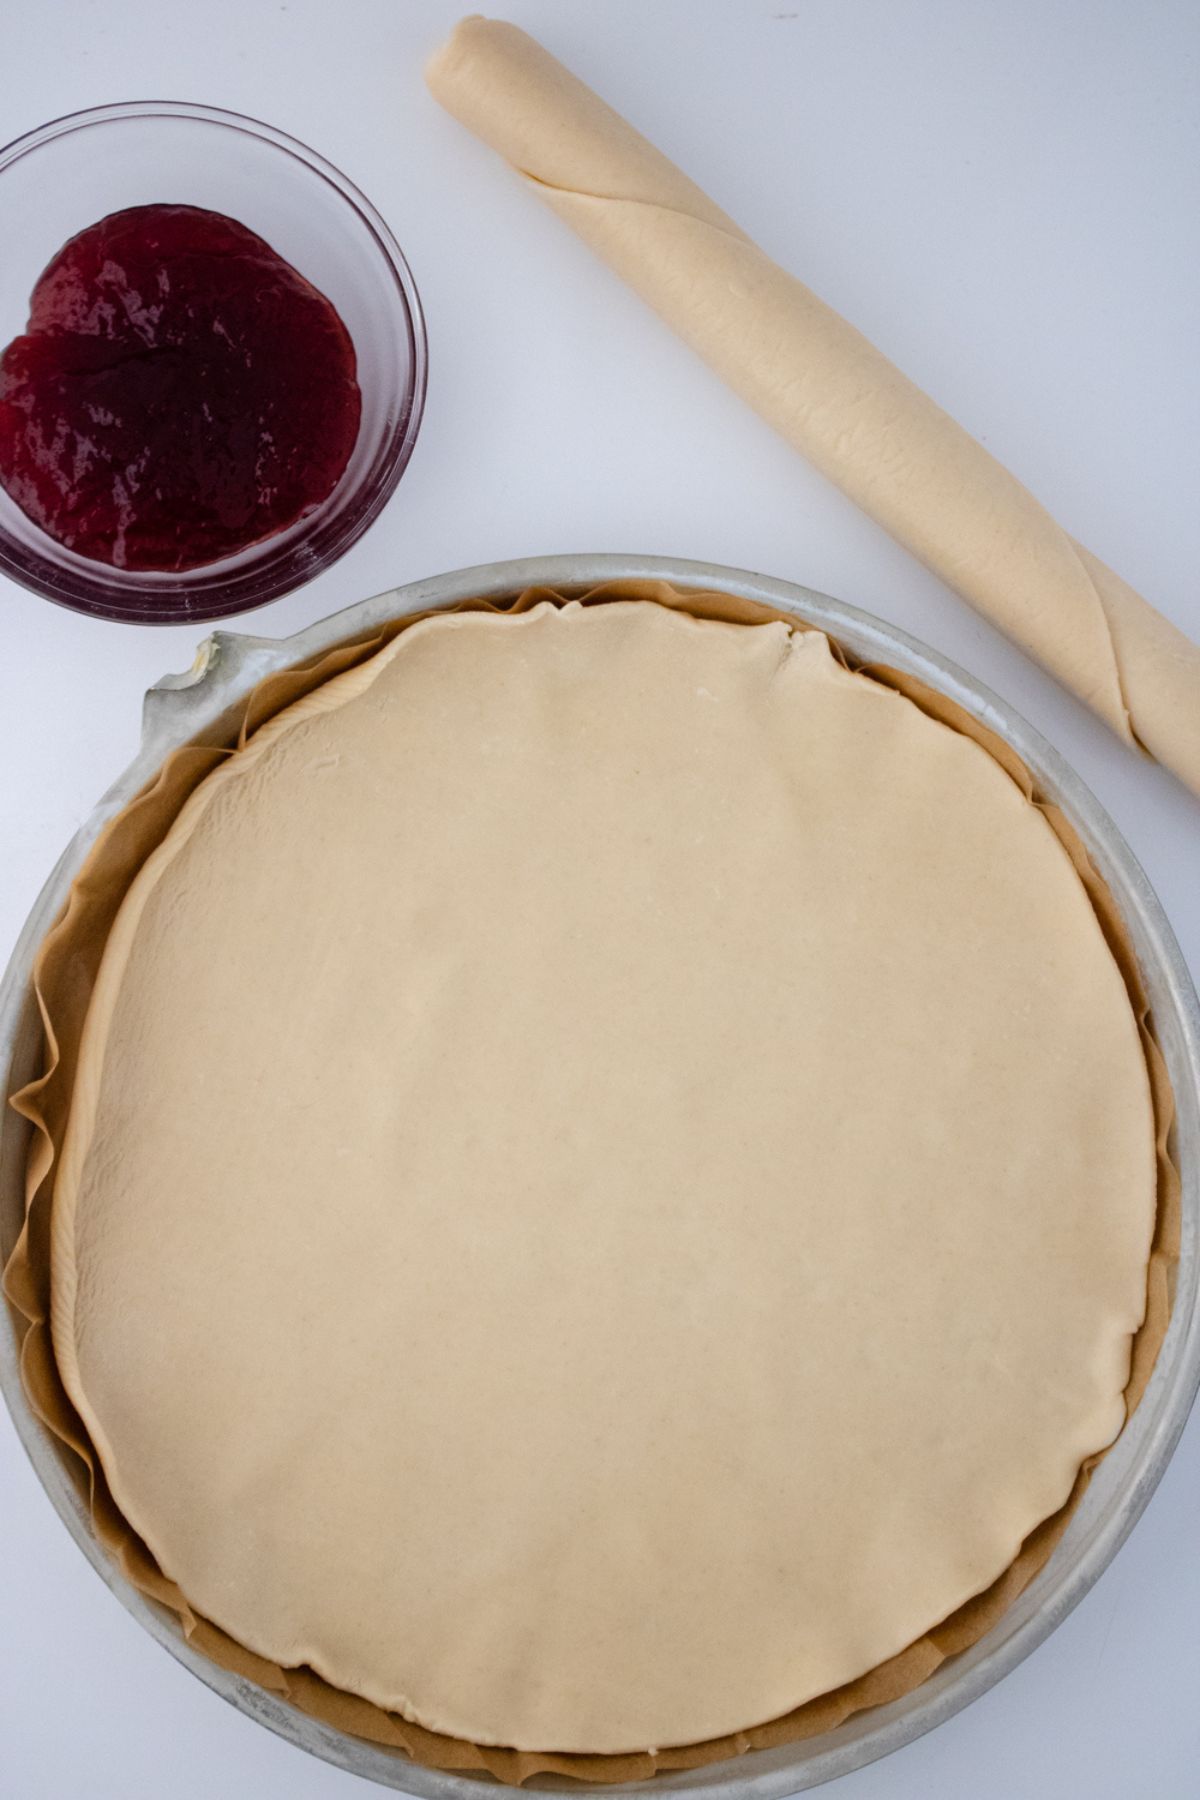 A rolled out pie crust in a pan.